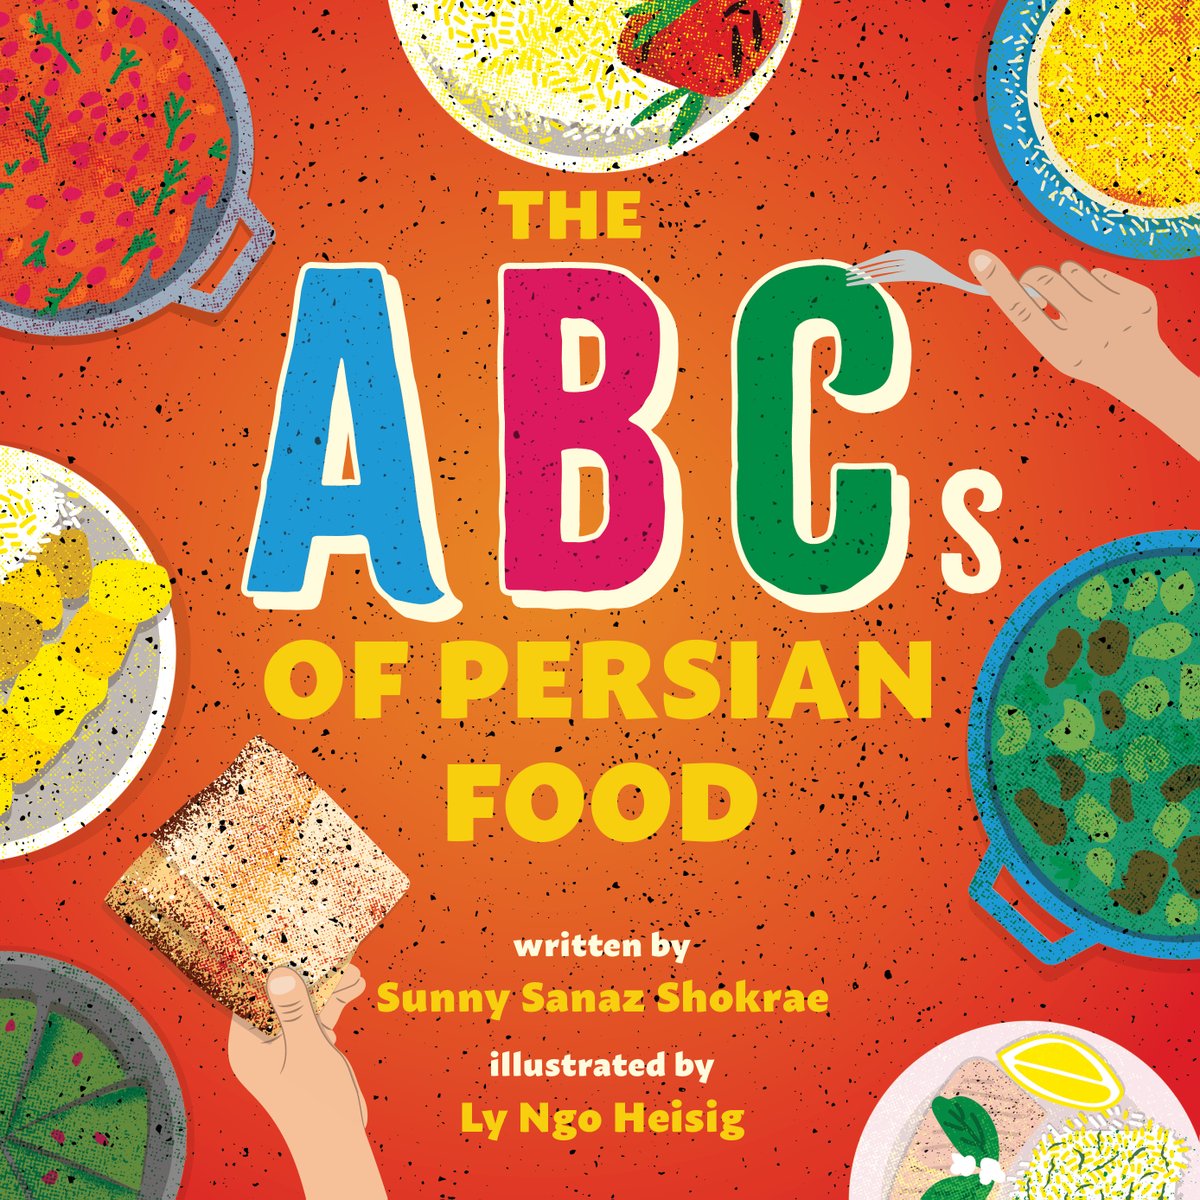 Pick up a copy of #TheABCsOfPersianFood by Sunny Sanaz Shokrae & Ly Ngo Heisig today to embark on a culinary journey! This delicious alphabet book introduces young readers to the flavors and culture of Iran. Every page is a treat! #BookBirthday bit.ly/3SGZF5R